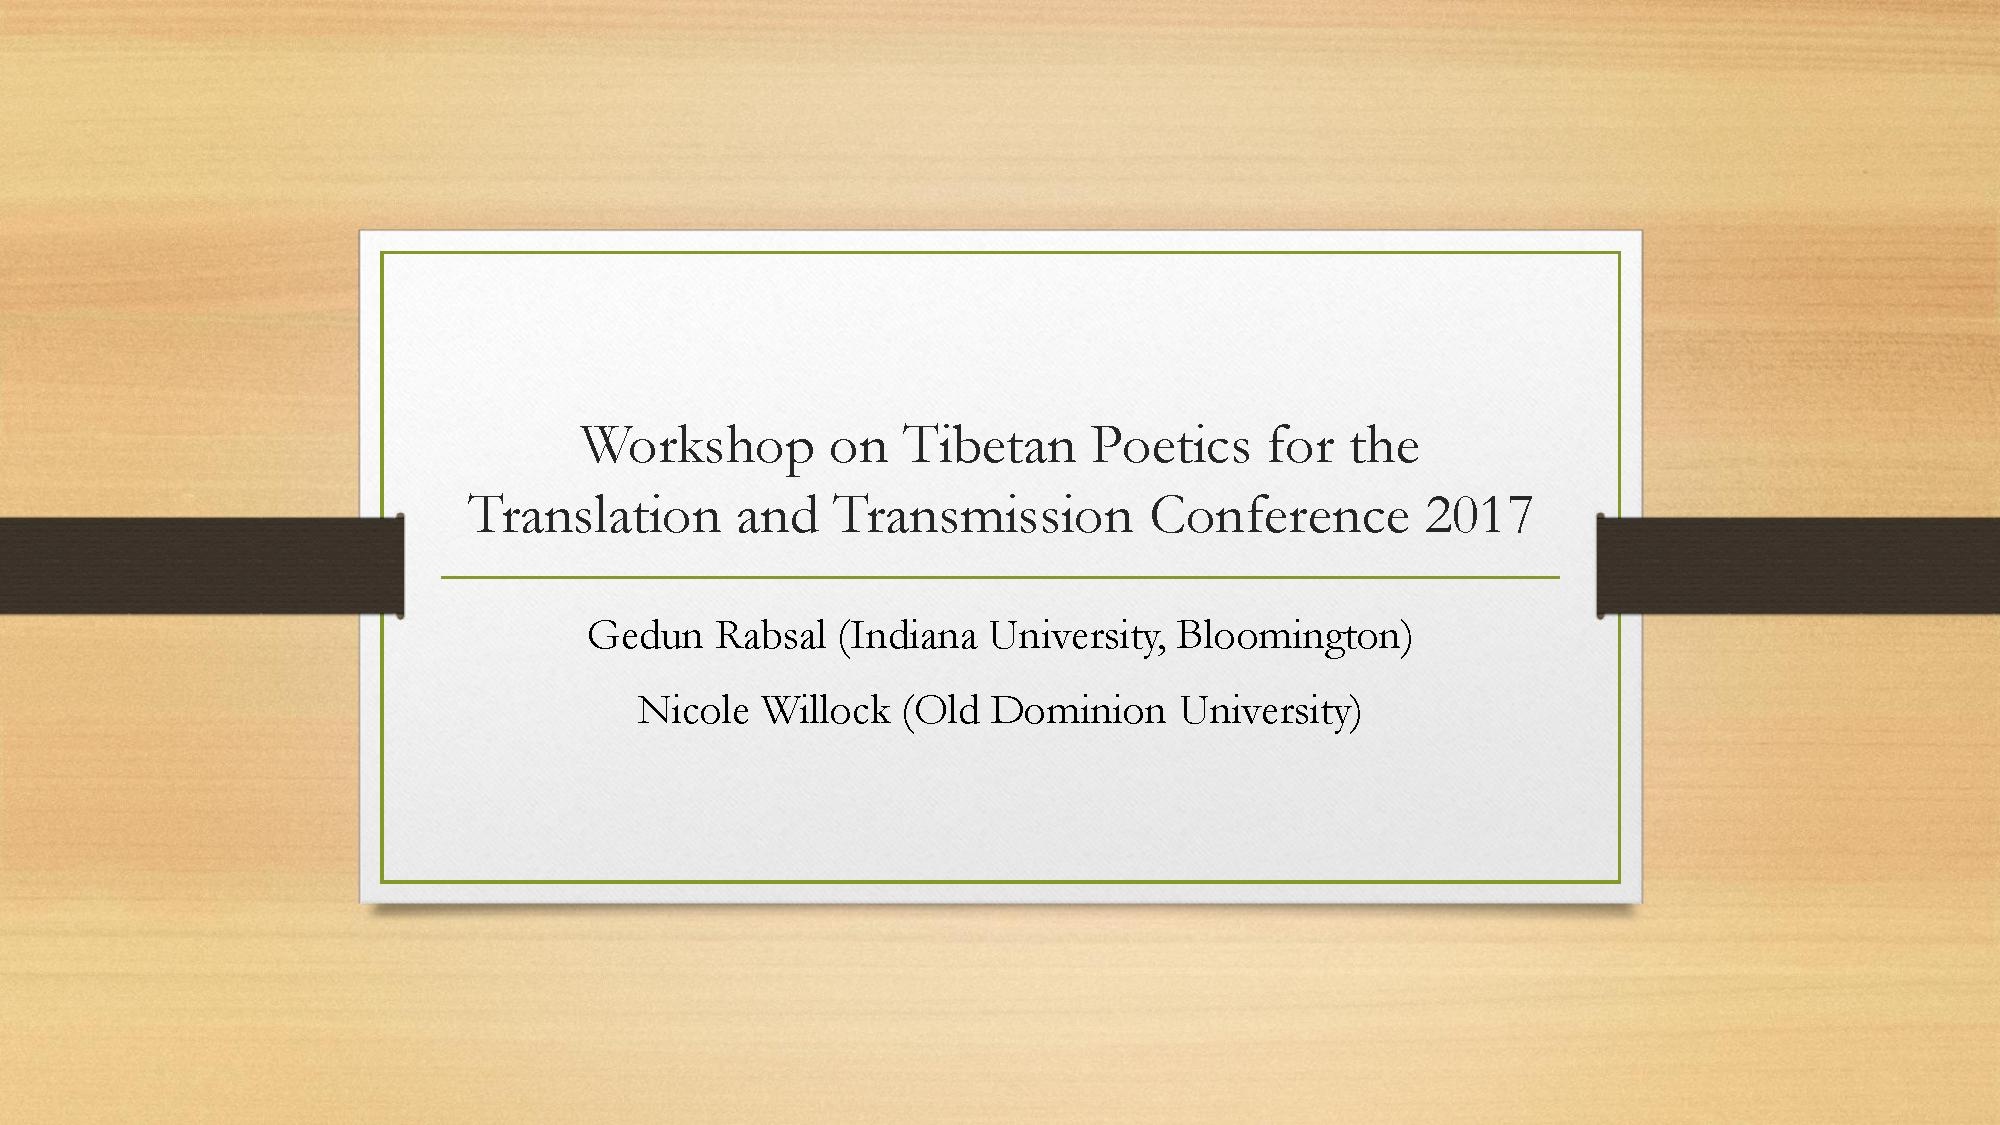 Slides shown by Nicole Willock and Gendun Rabsal at the 2017 Translation & Transmission Conference.